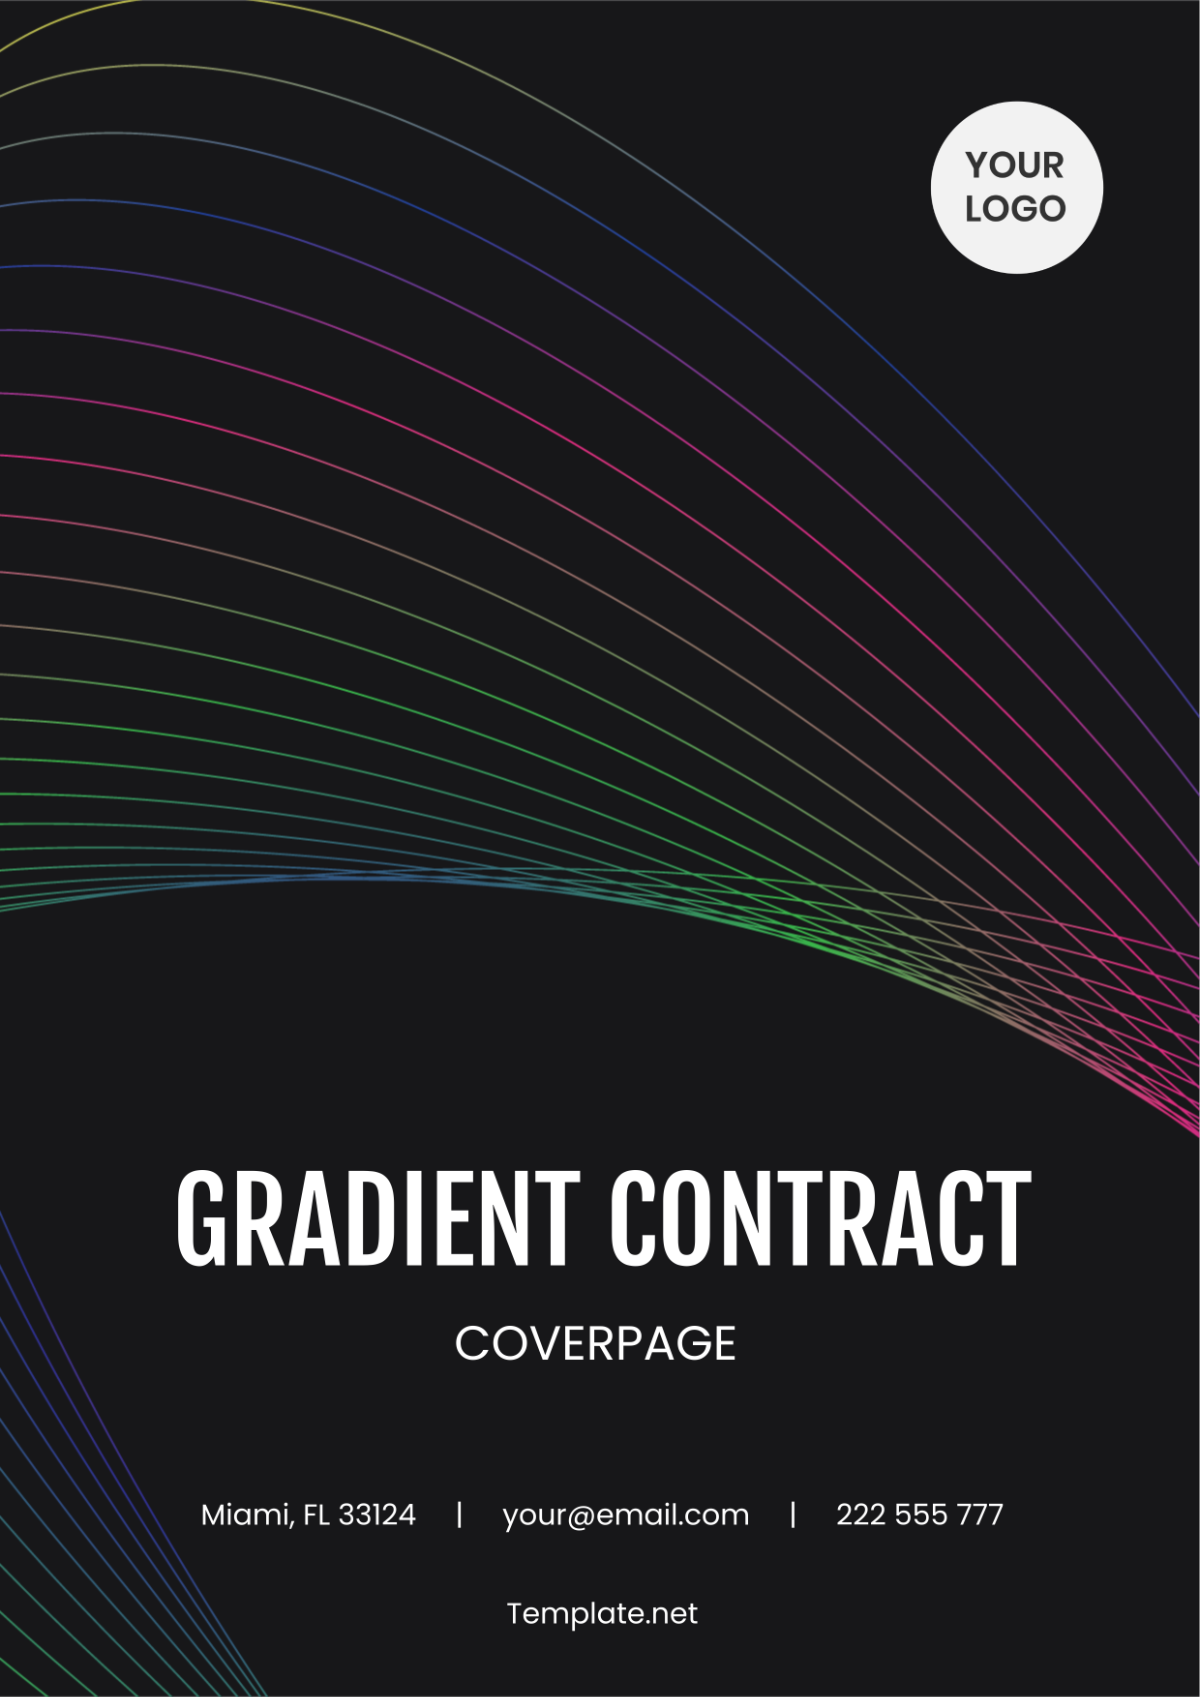 Gradient Contract Cover Page